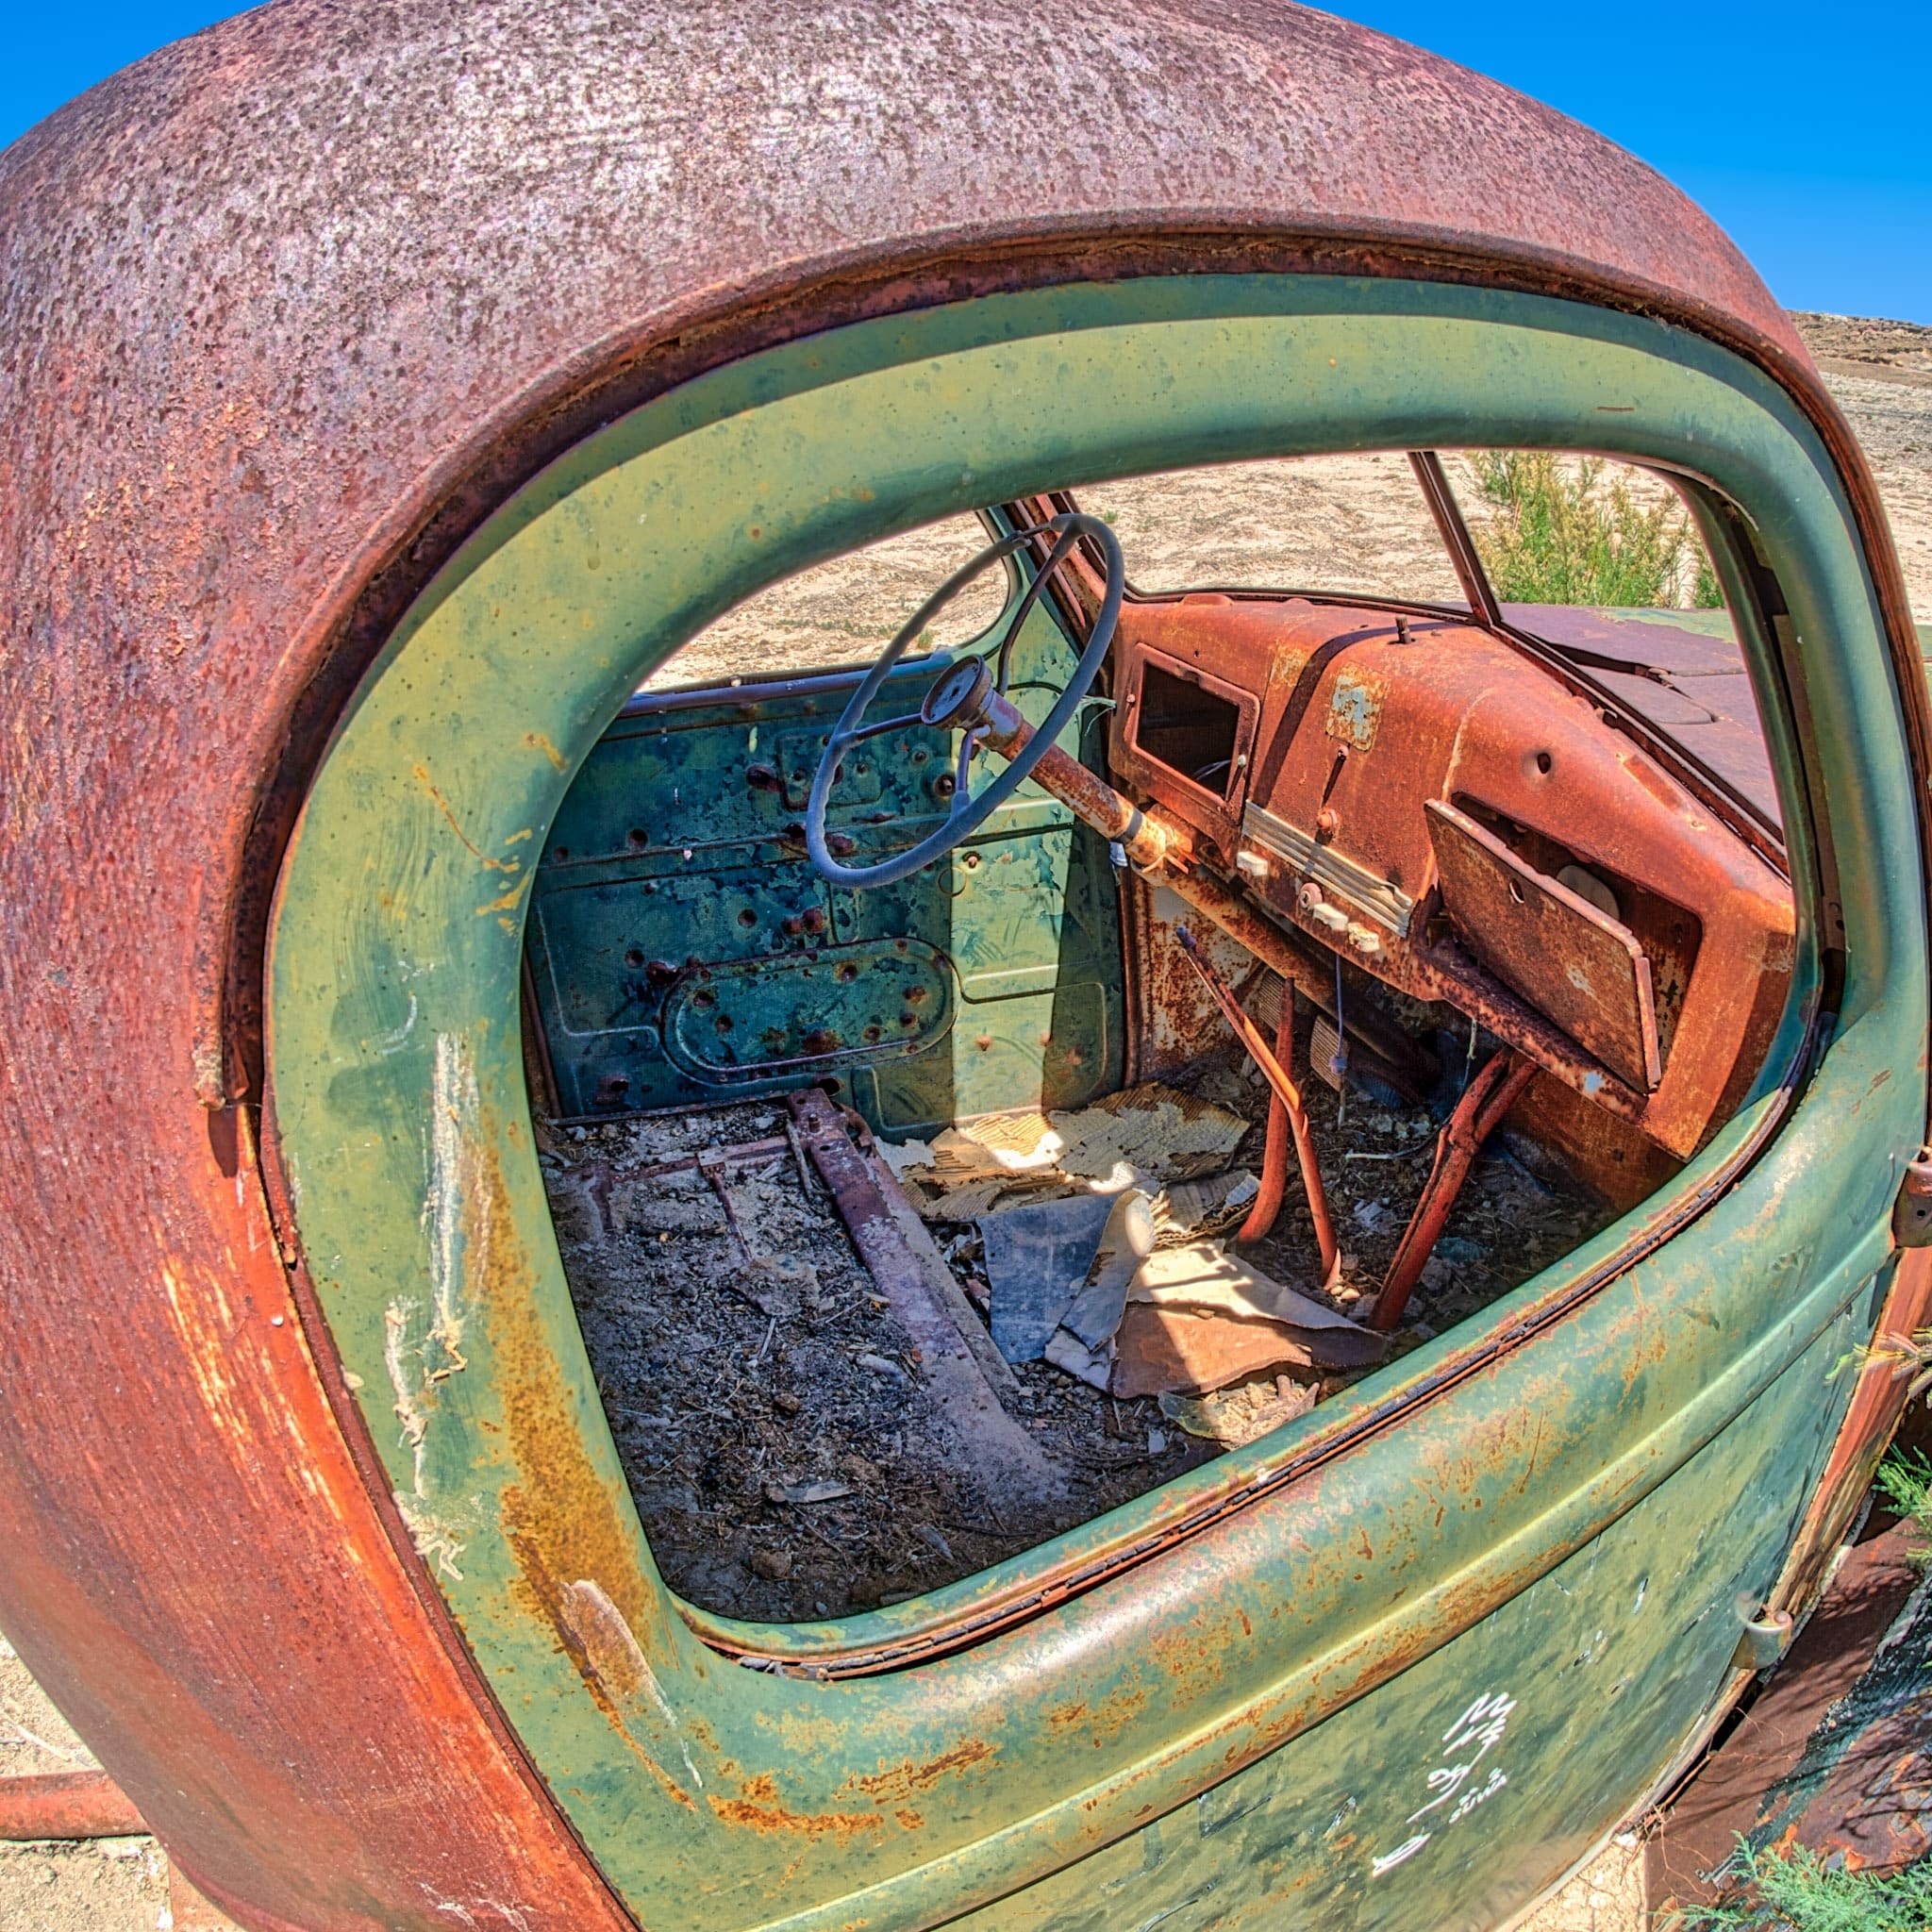 Bullet riddled cab of a water-drilling rig abandoned along Hartnet Road on the way to Cathedral Valley in Capitol Reef National Park, Utah.